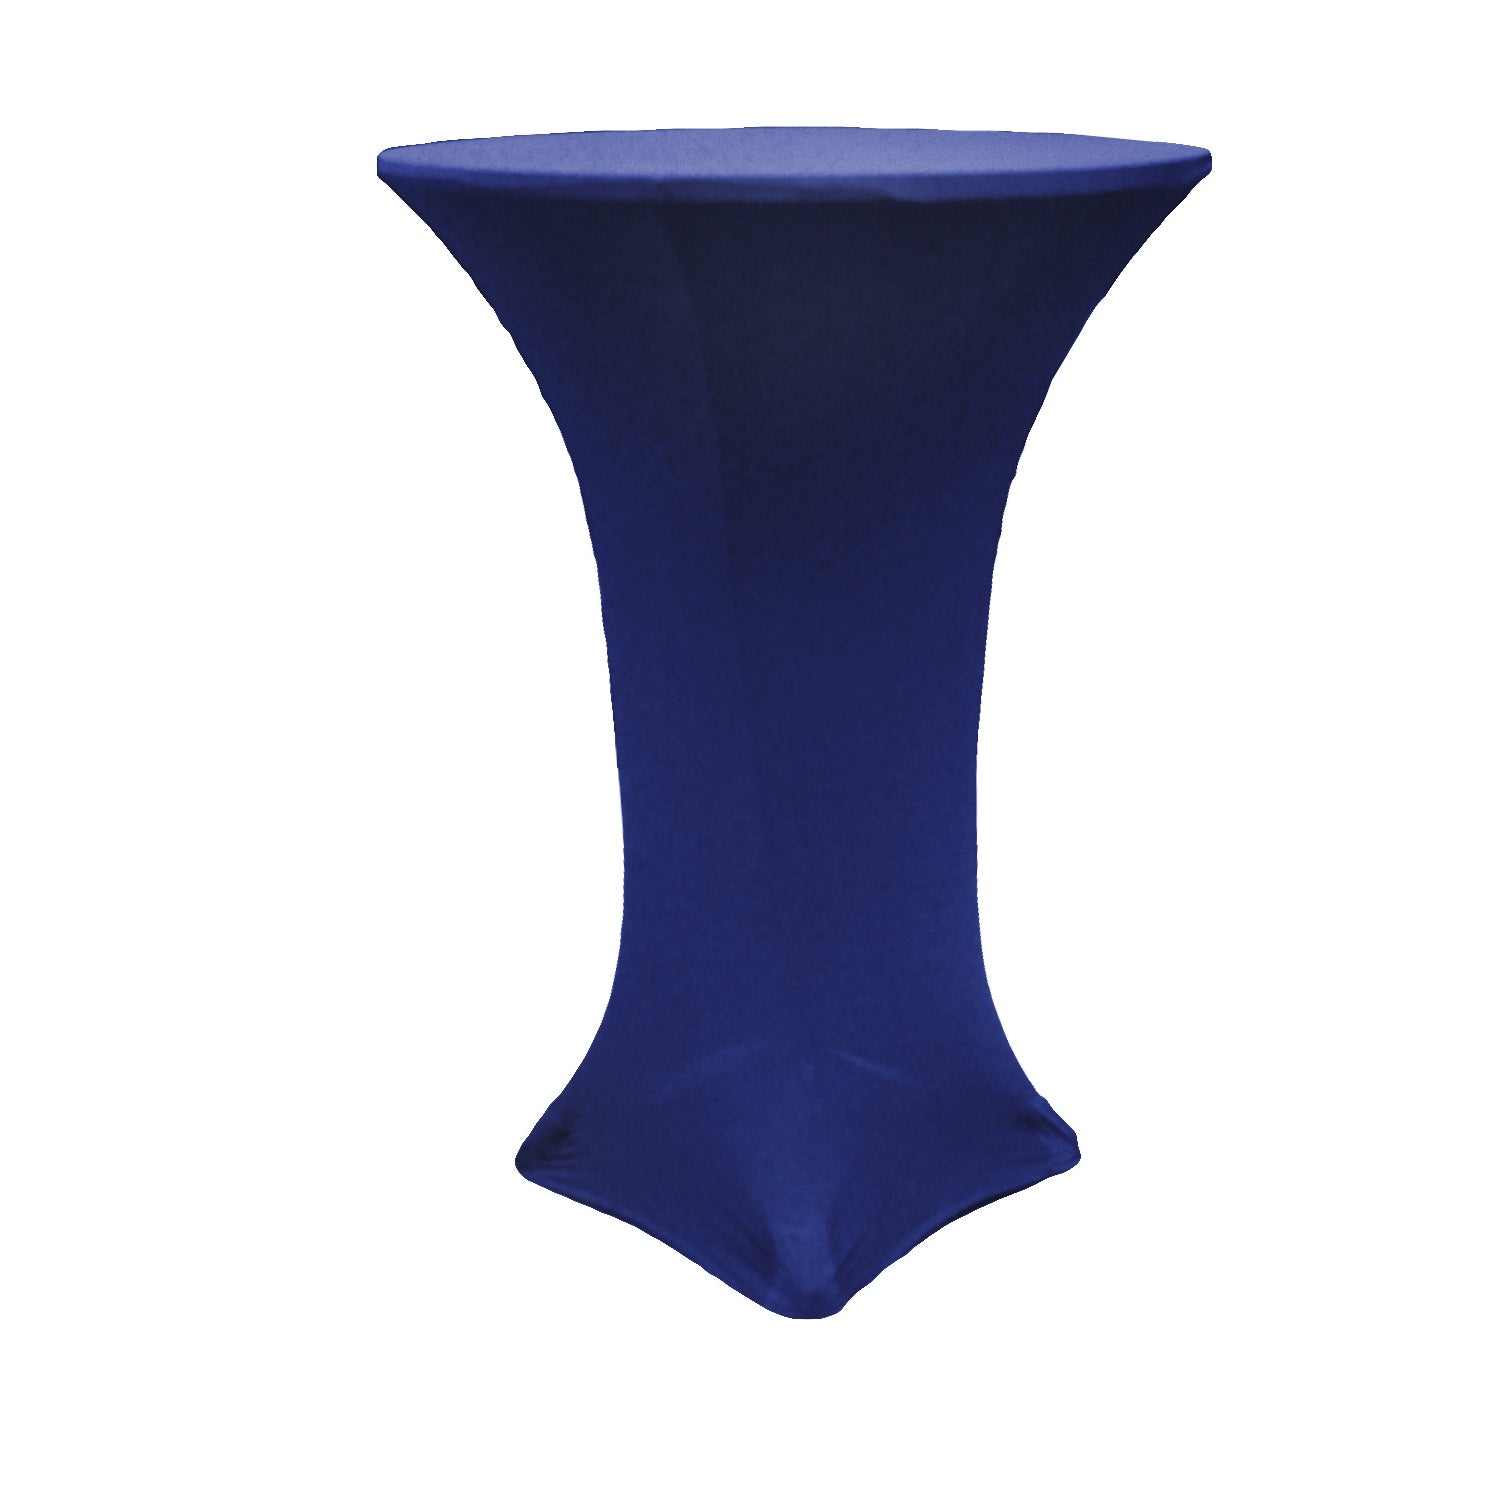 Spandex Cocktail Table Cover 36" Round - Navy Blue - CV Linens